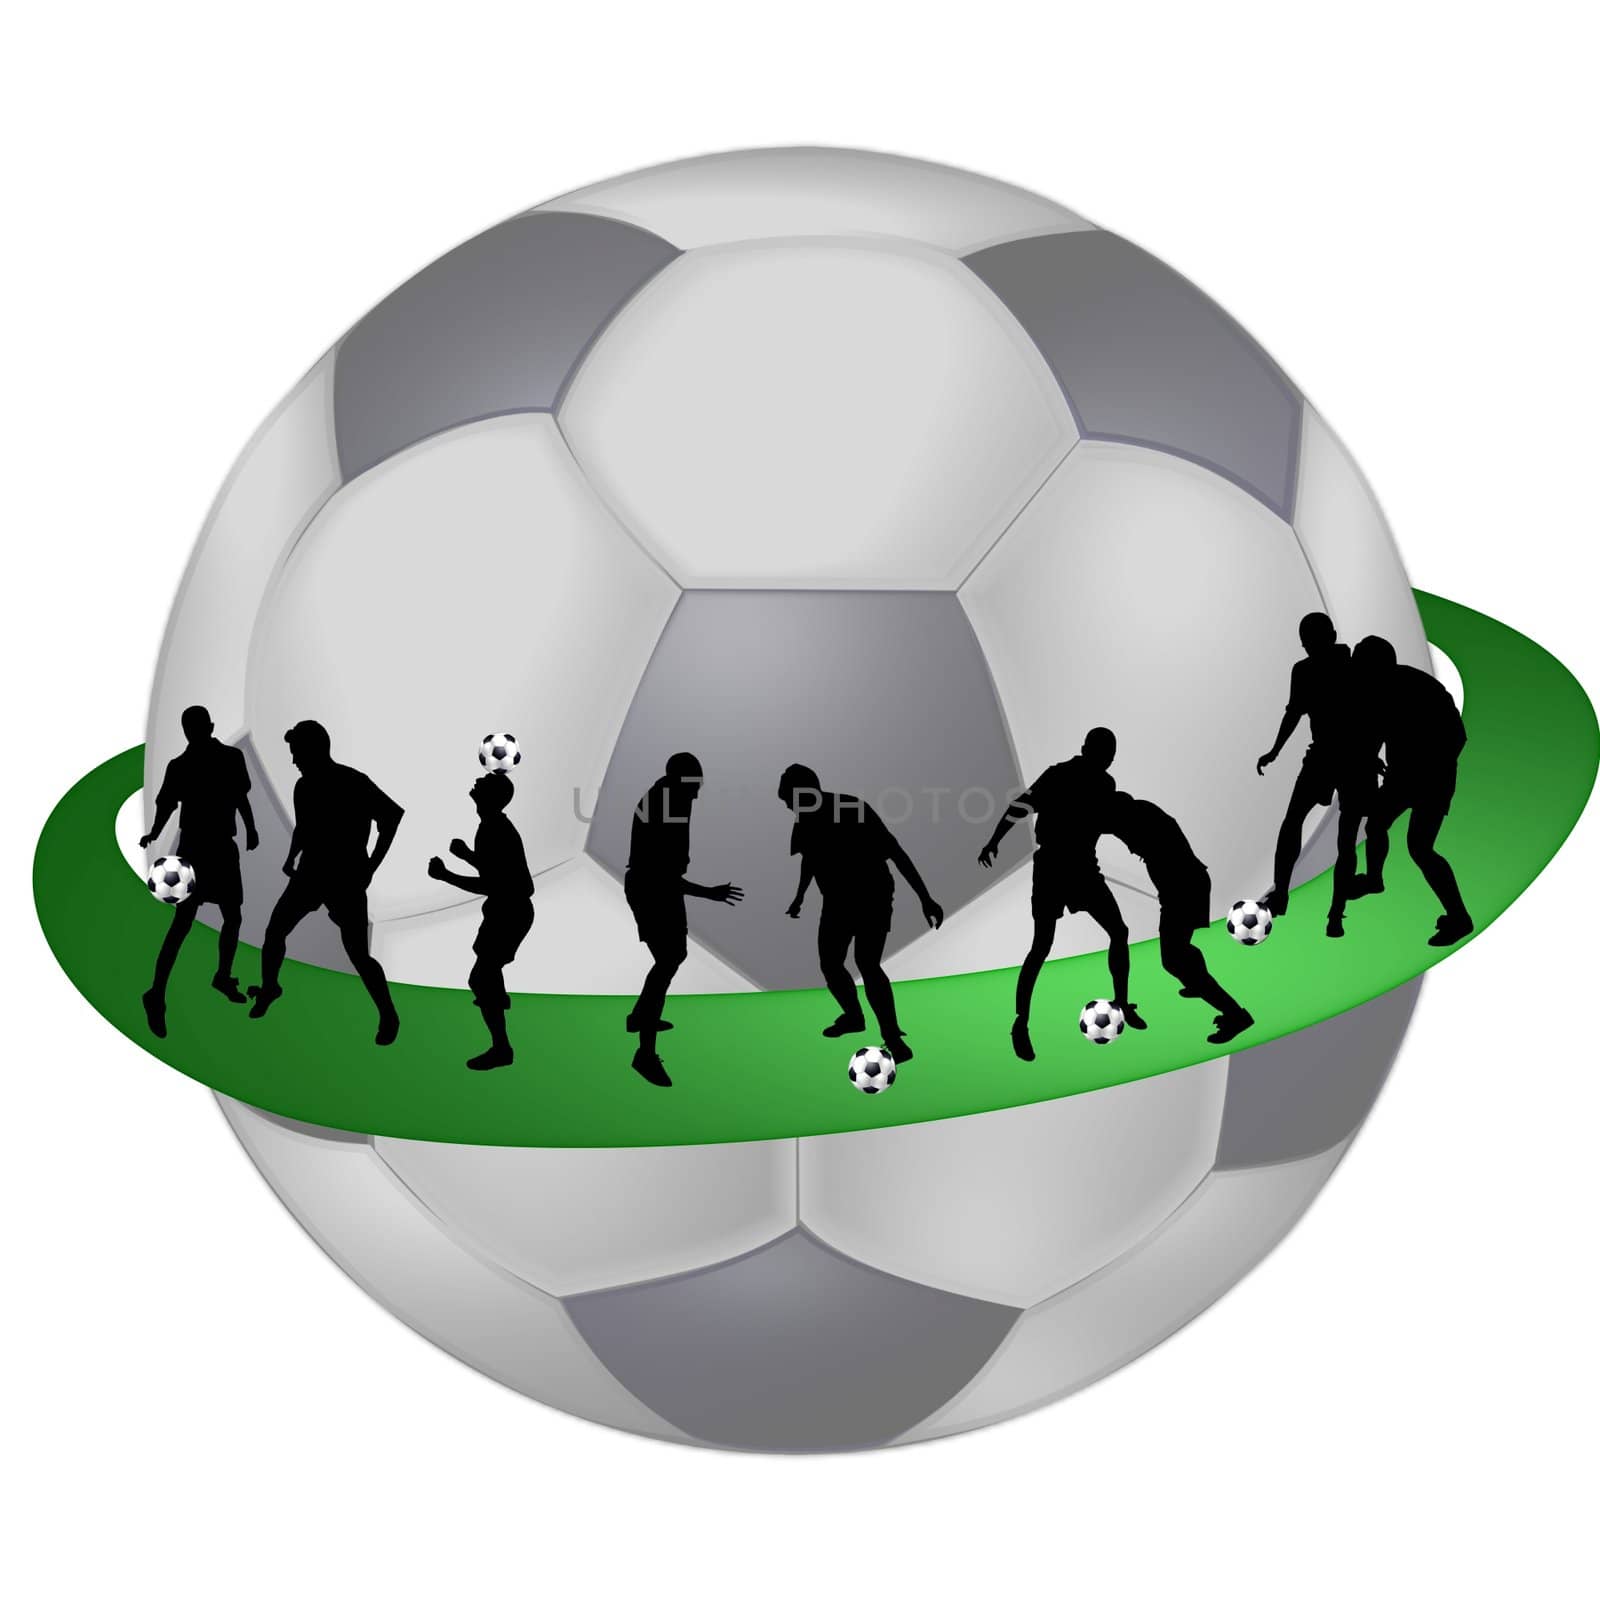 soccer fans around the globe by peromarketing